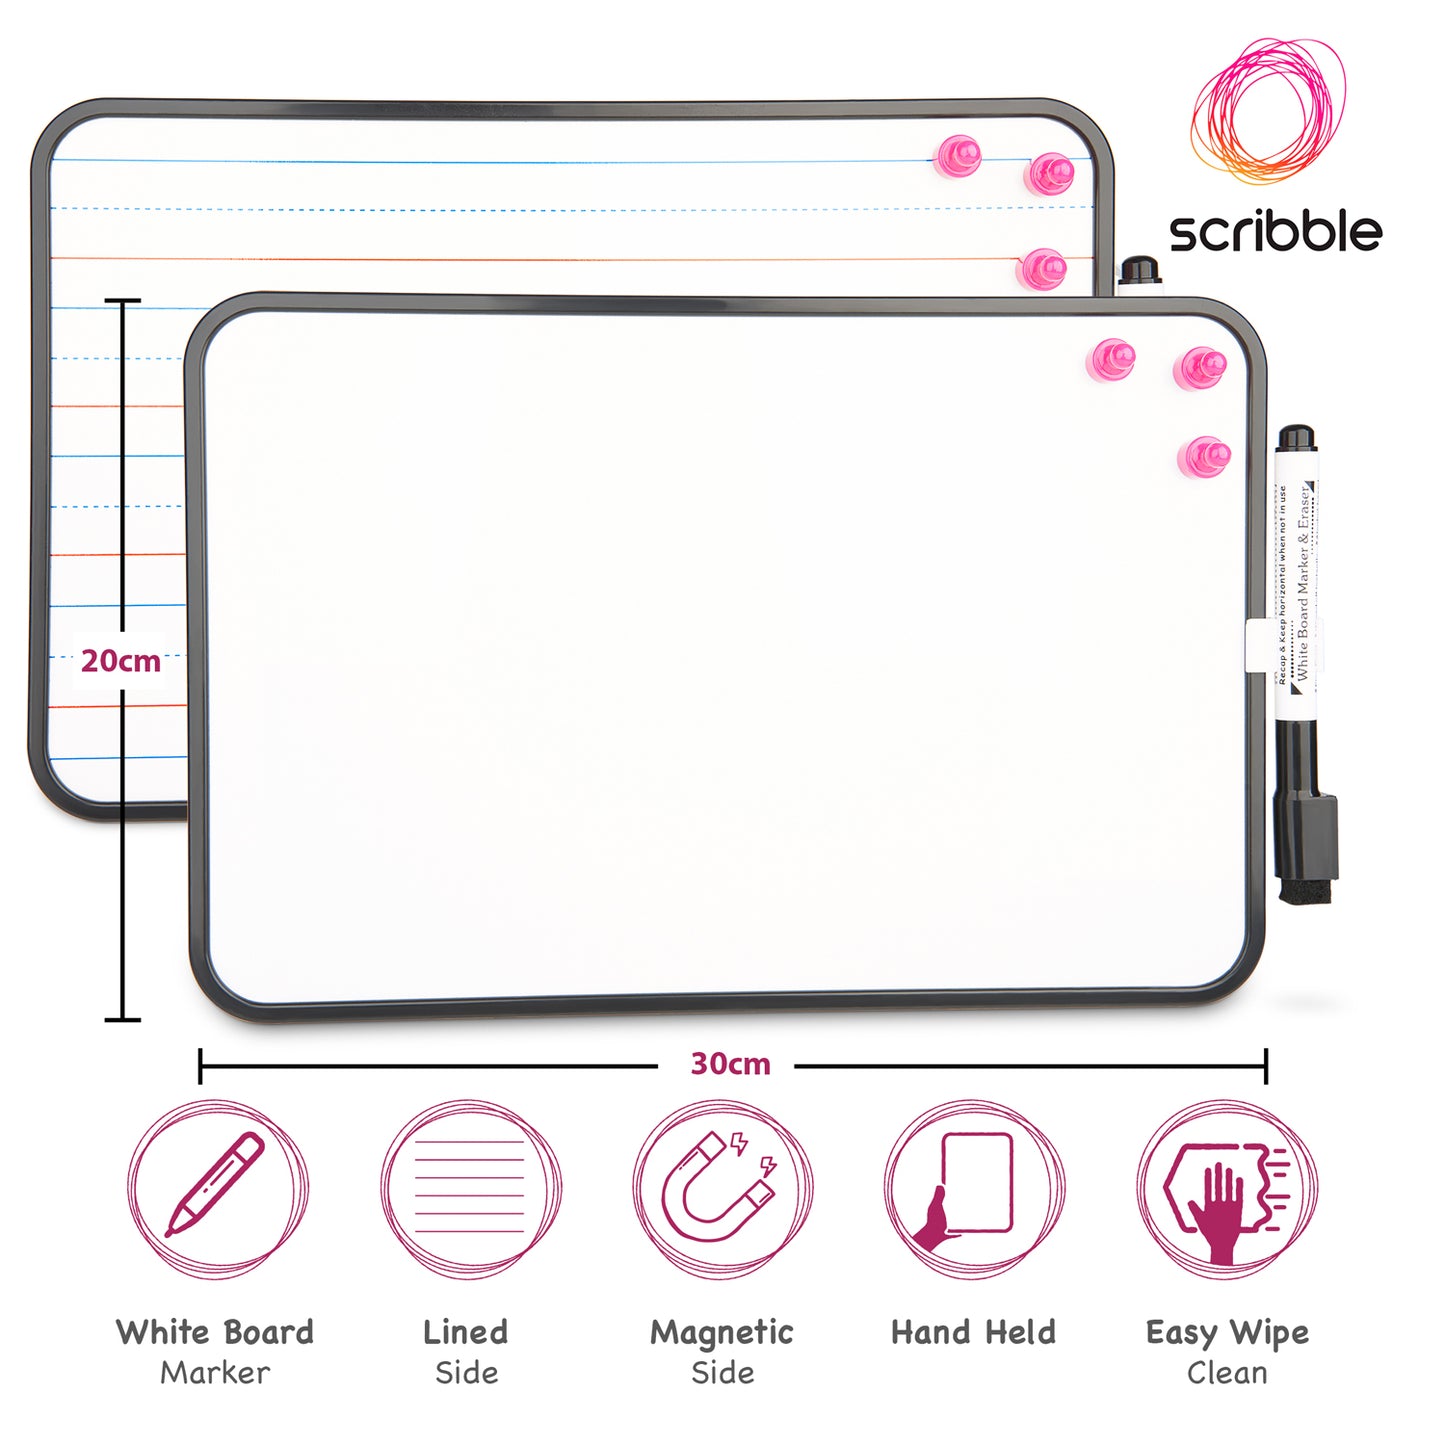 MINI A4 sized Double Sided Handheld Magnetic Whiteboard